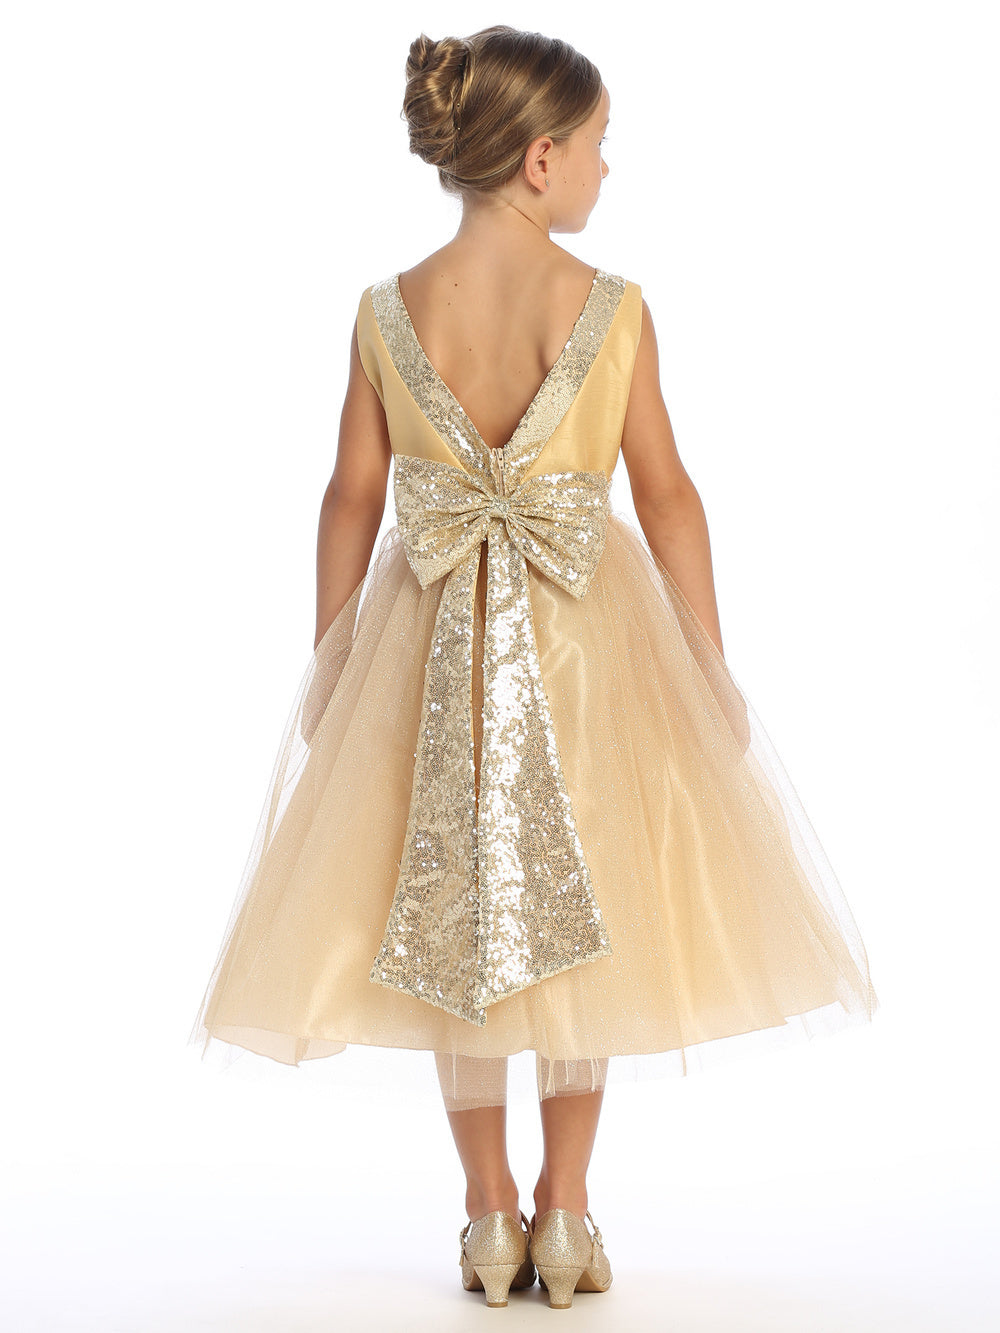 Gold Shantung and Sparkle Tulle Dress with Sequin Sash - BL255-GOLD